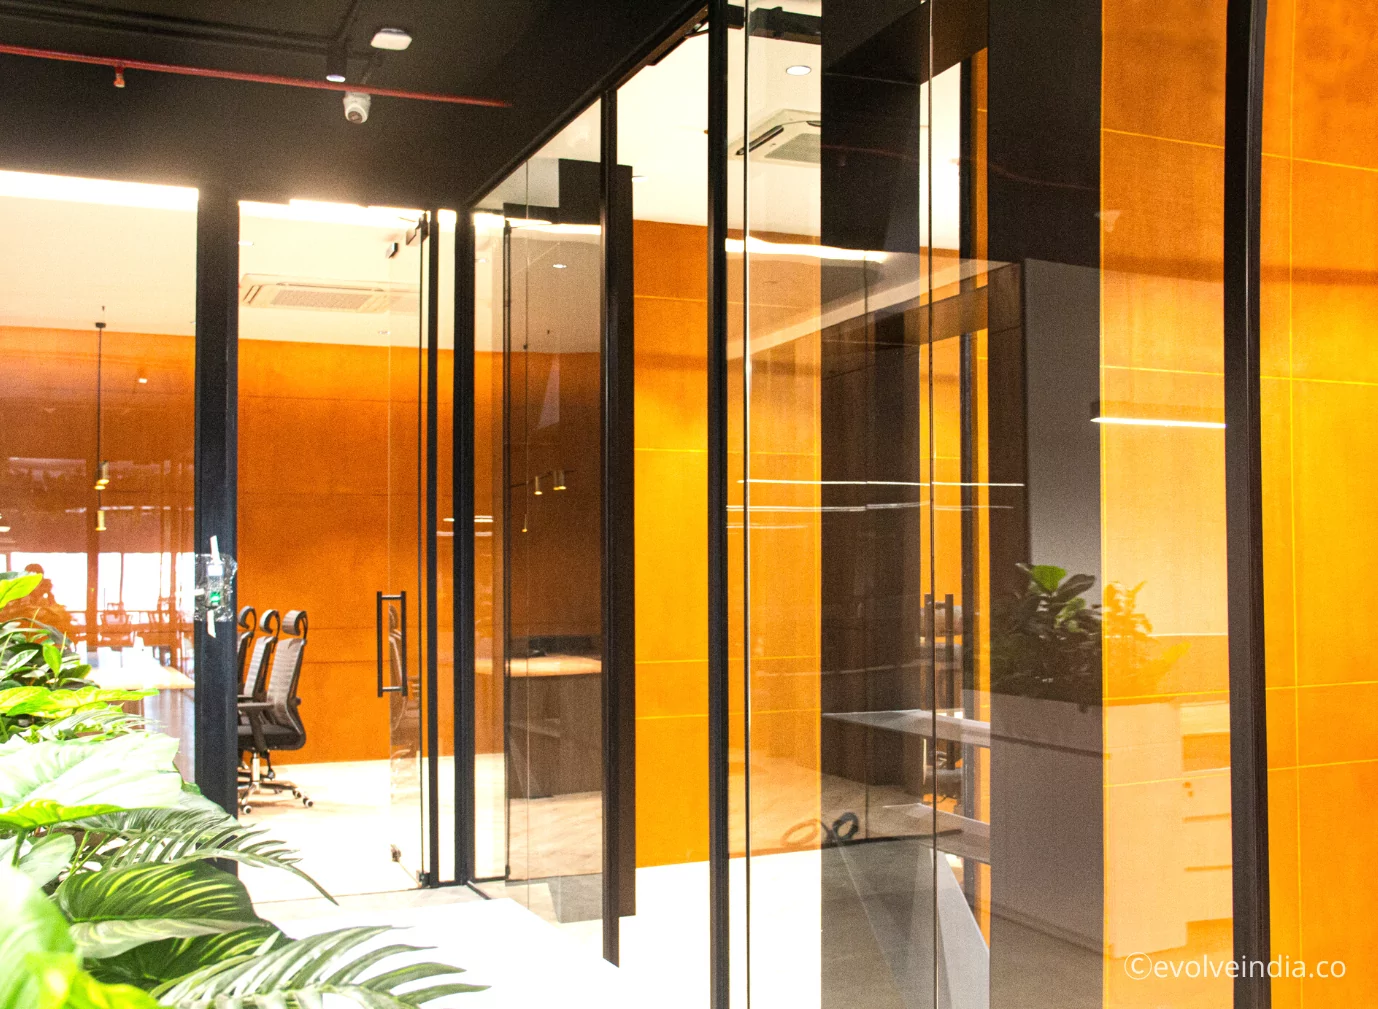 Dadar Rust Office Project By Evolve India